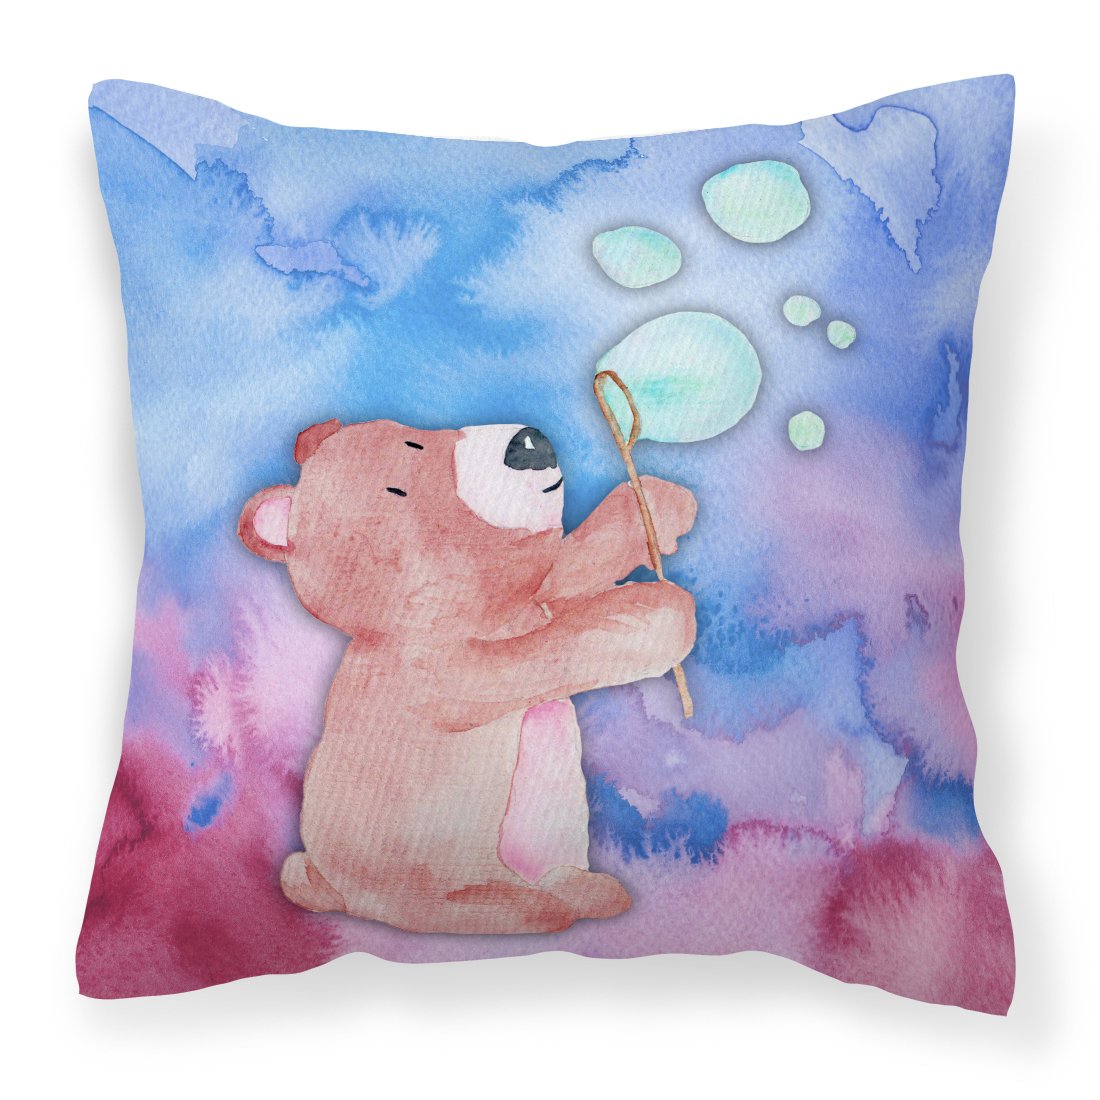 Bear and Bubbles Watercolor Fabric Decorative Pillow BB7347PW1818 by Caroline's Treasures